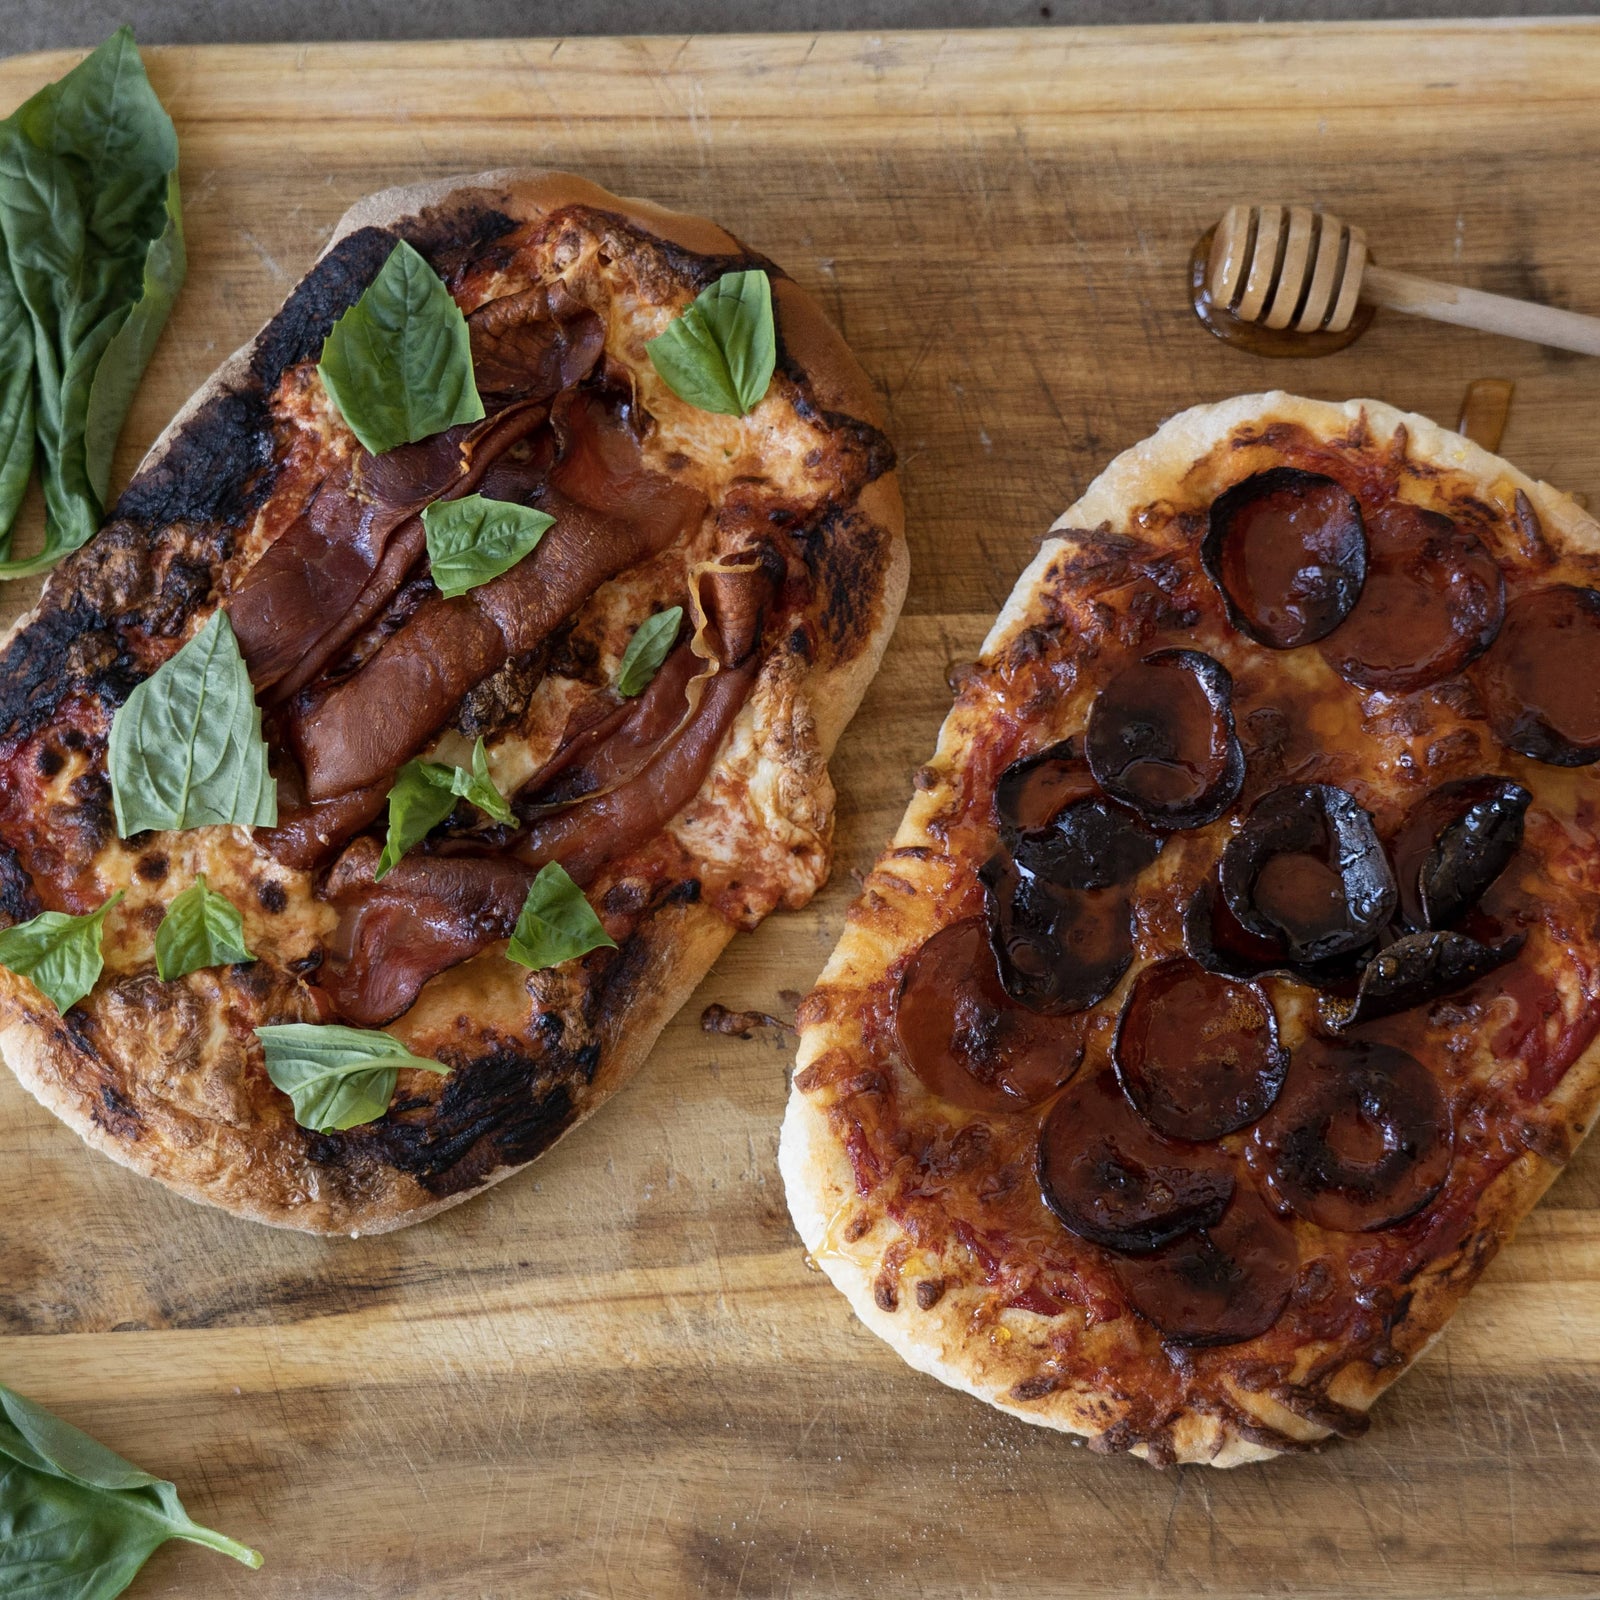 Make-Your-Own Air Fryer Pizzas